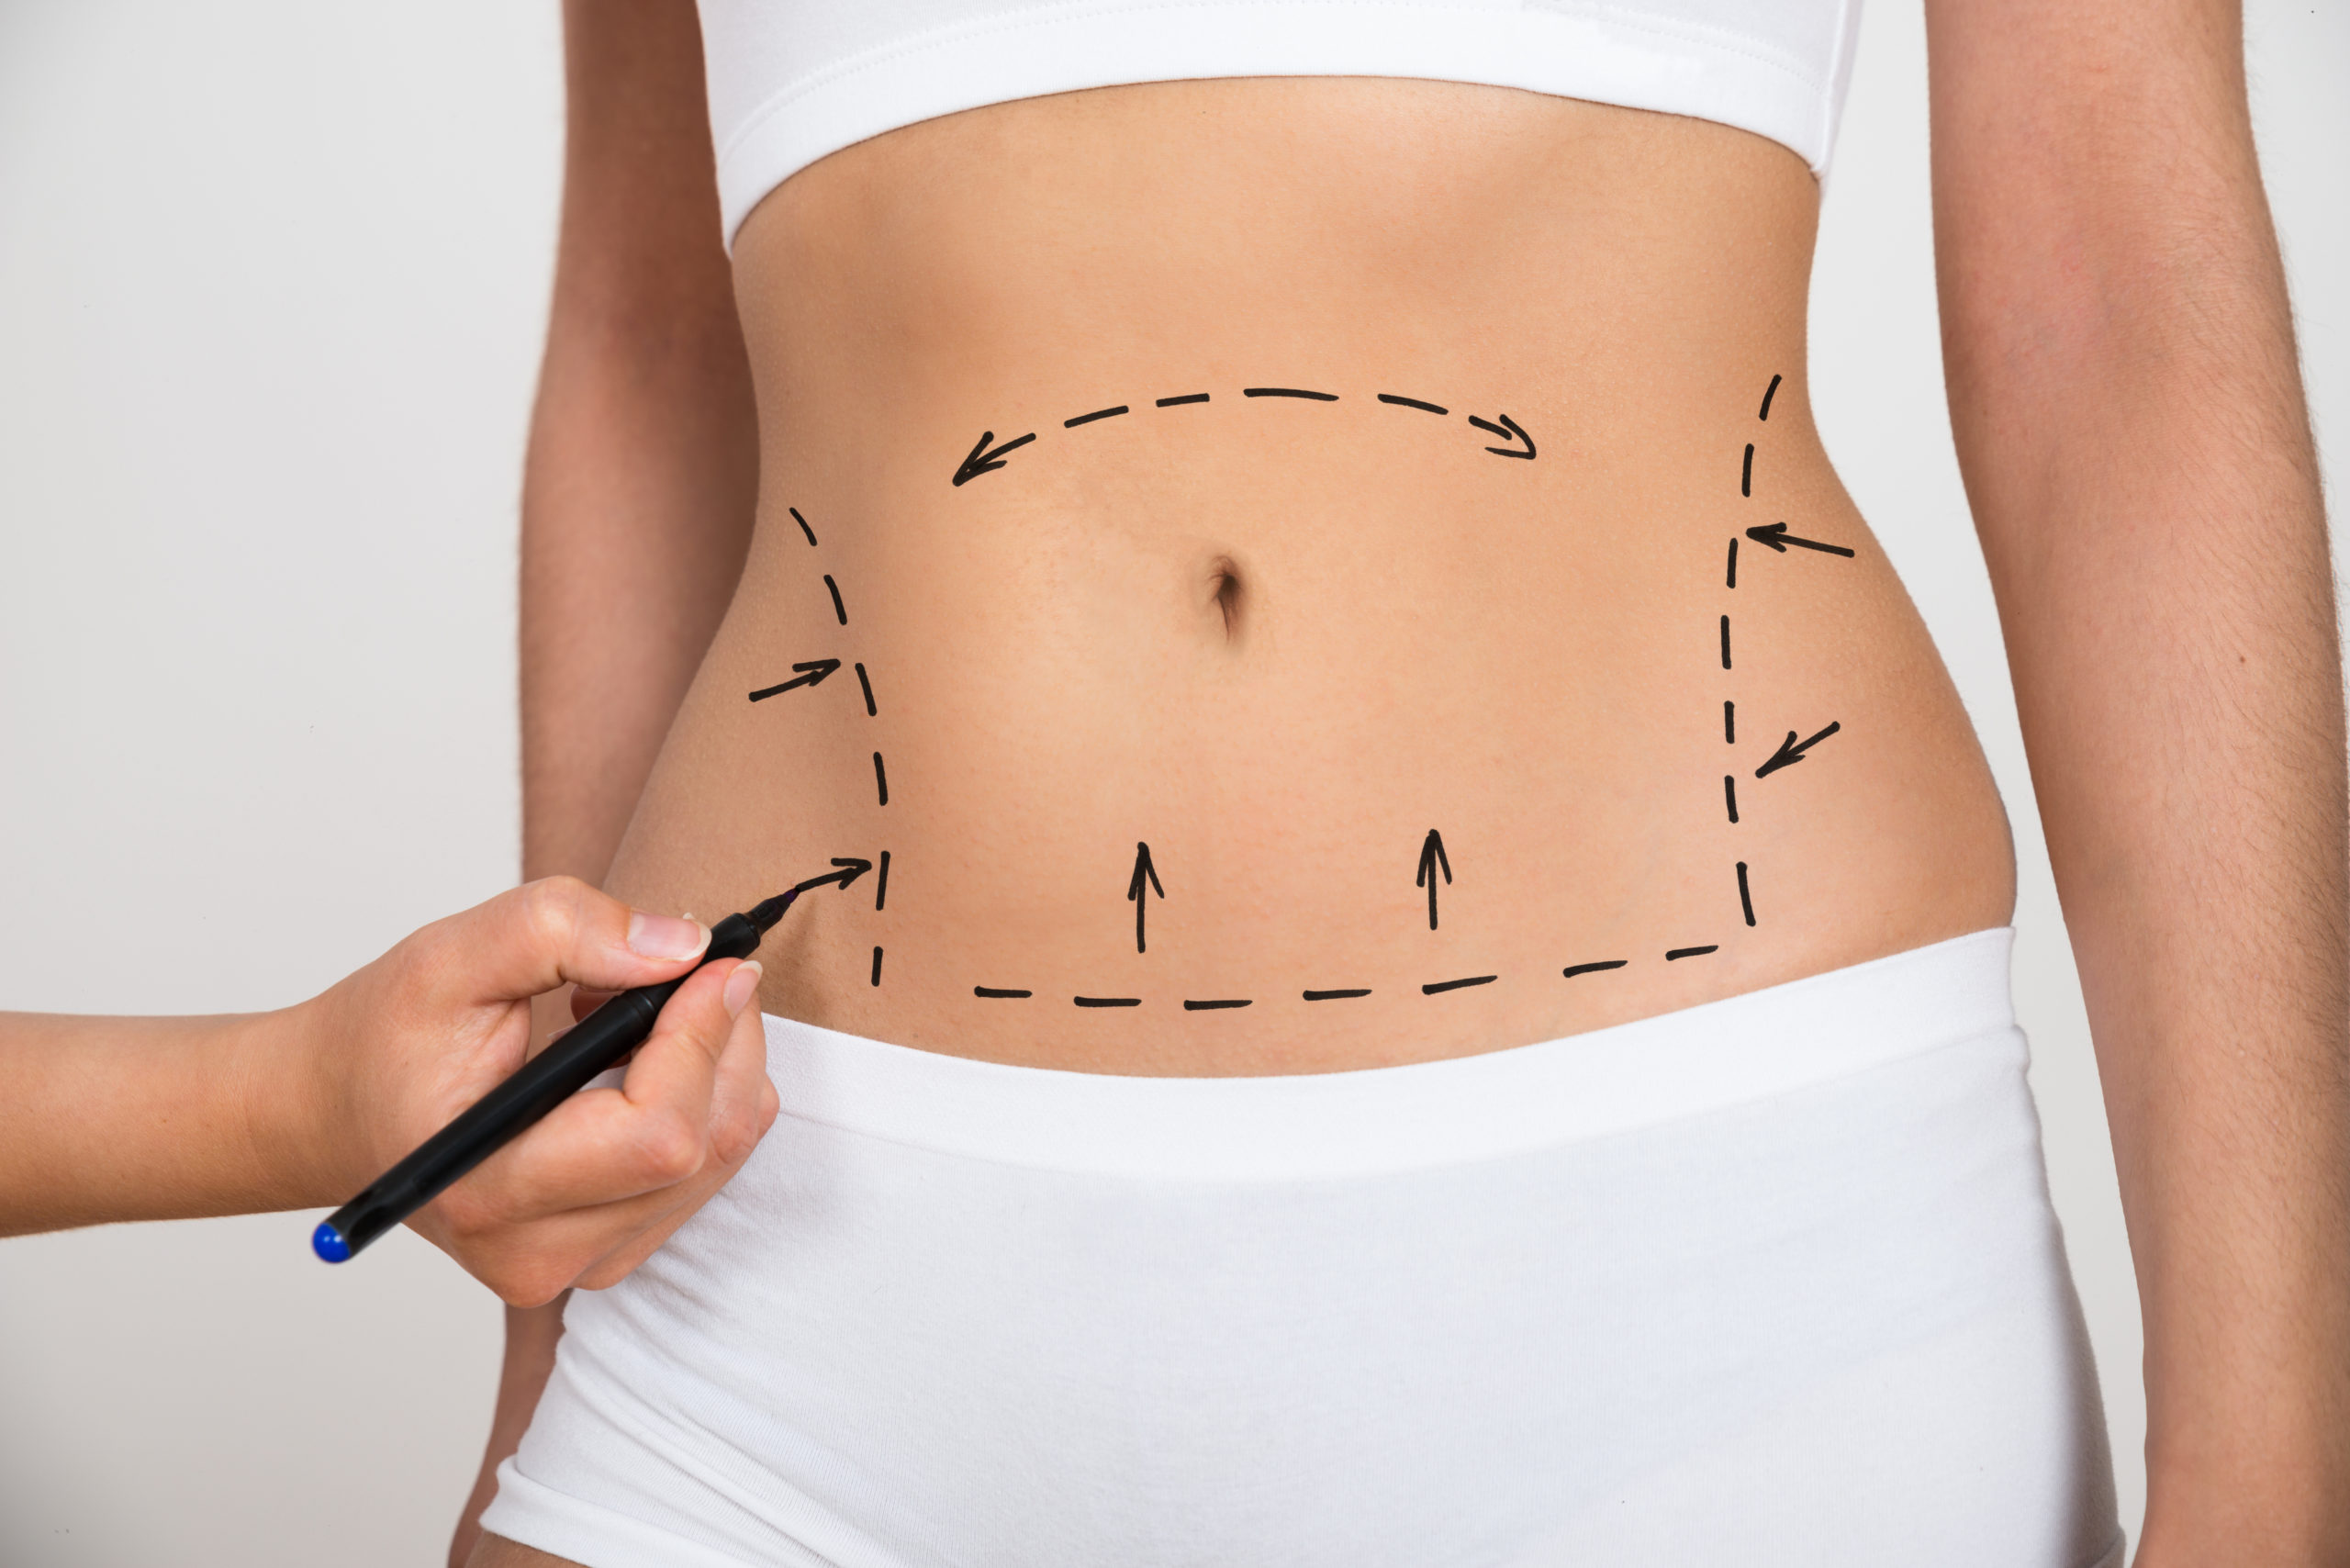 Tone Your Figure with Non-Surgical Body Contouring - Old Town Med Spa